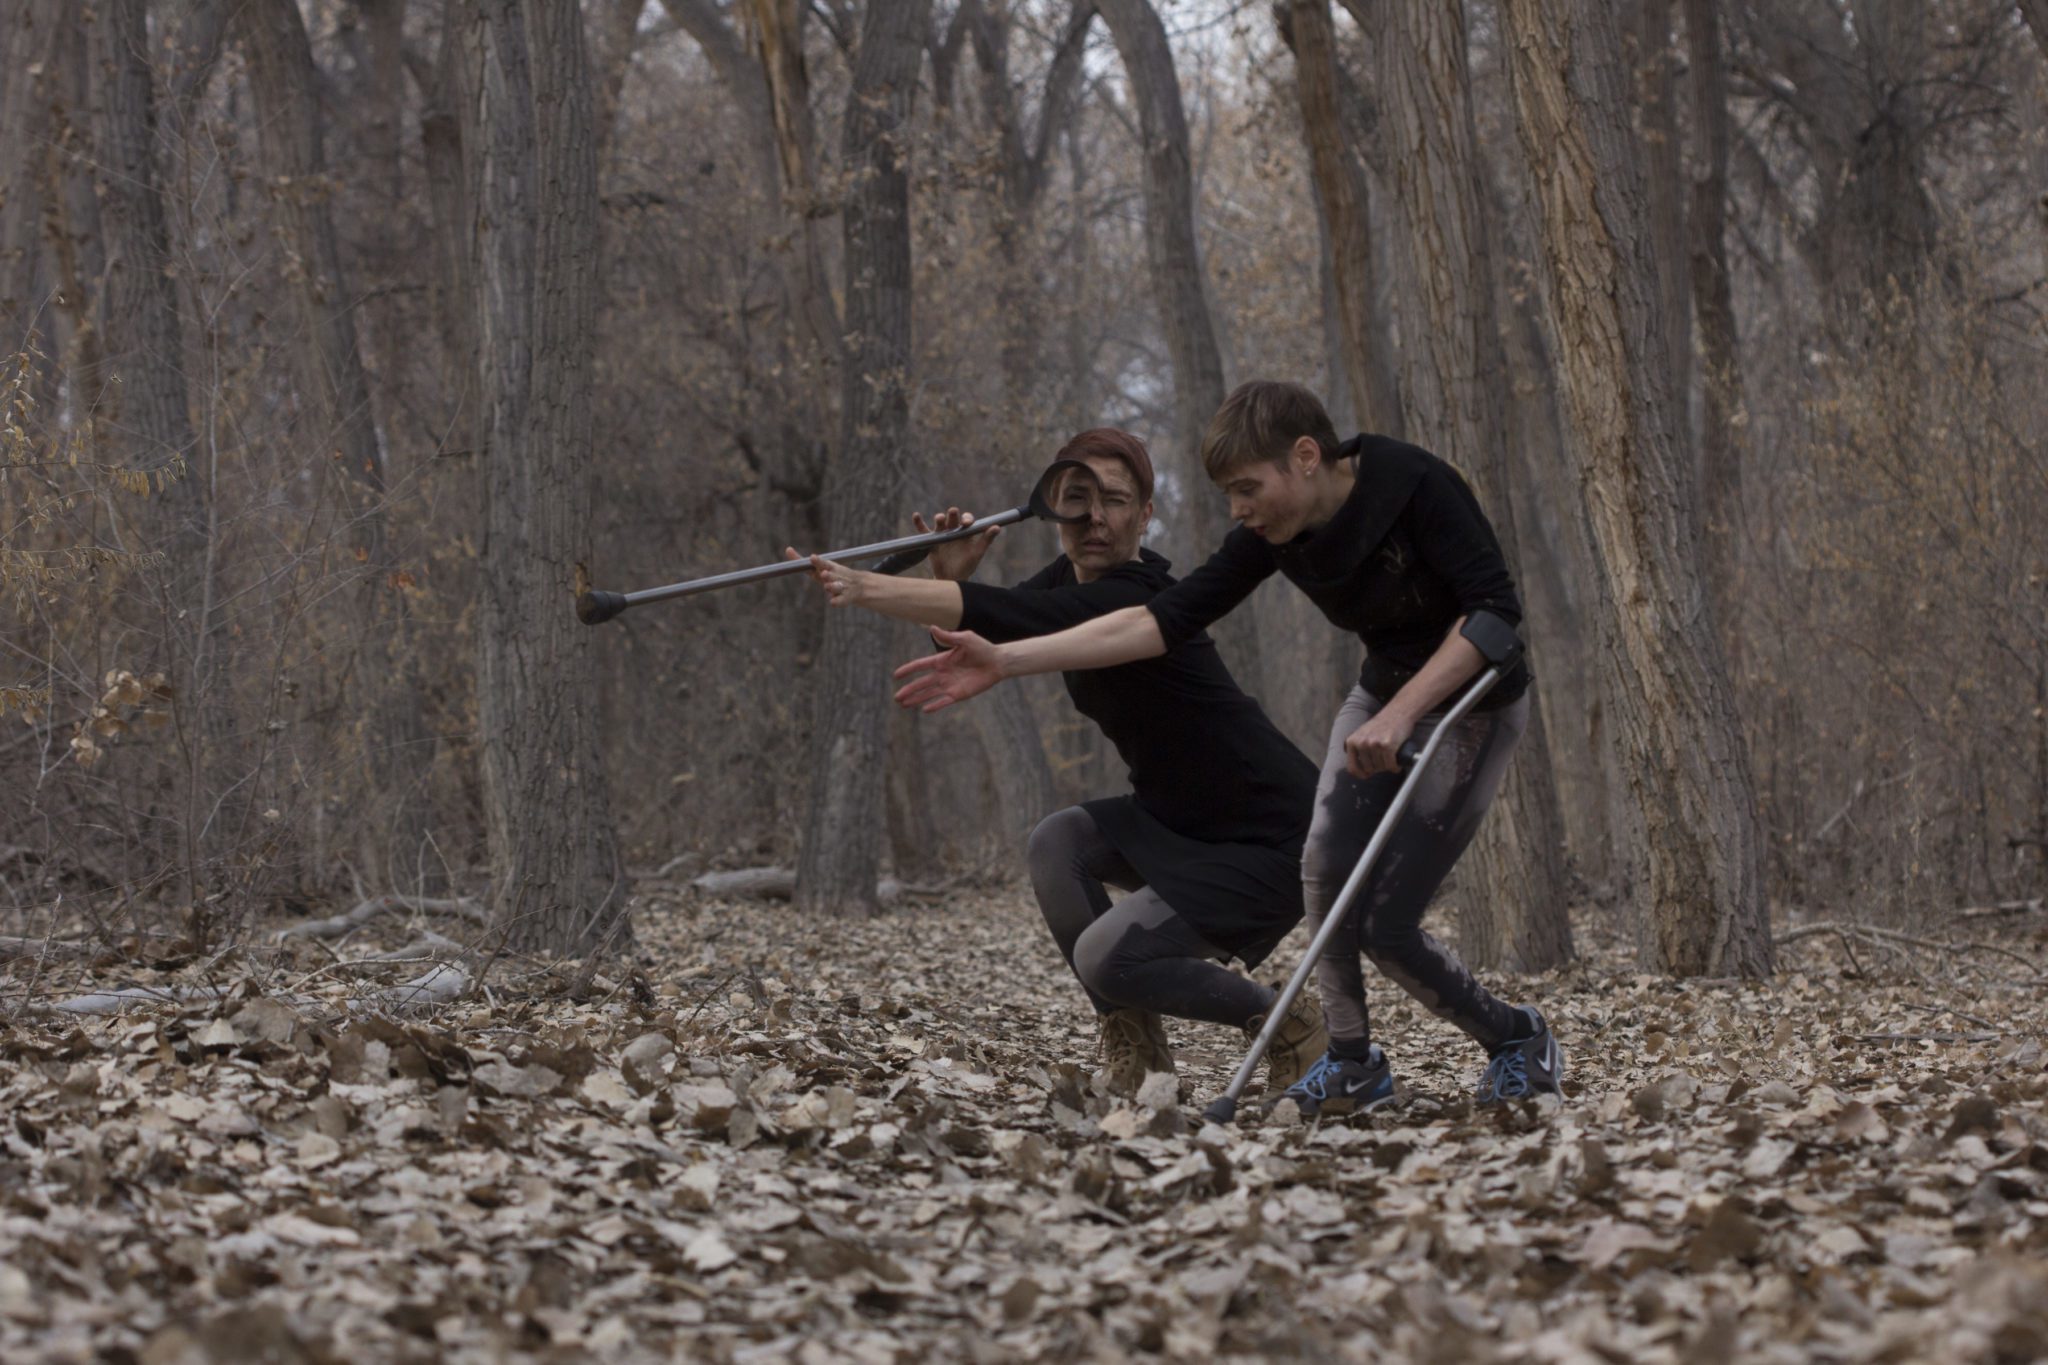 Silva Laukkanen and Tanya Winters performing in the woods. Silva is holding one of tanya's crutches and looks through it like a telescope.